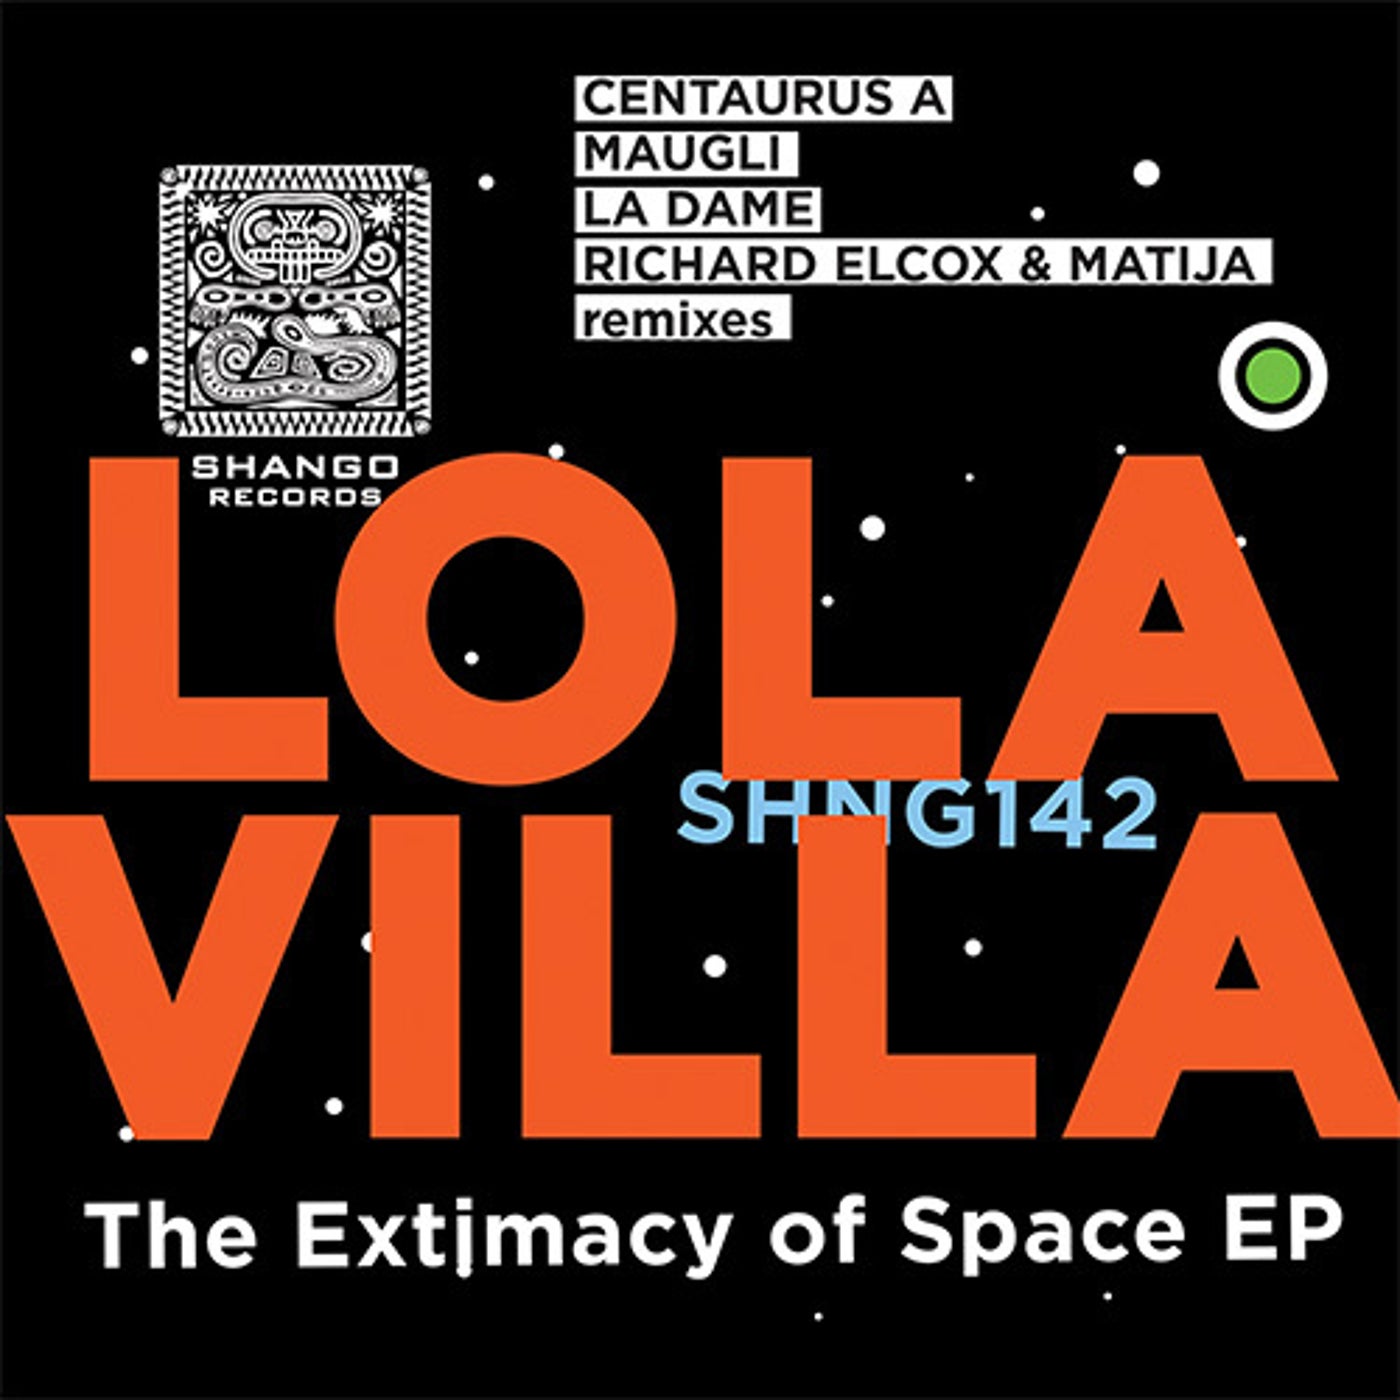 The Extimacy Of Space EP